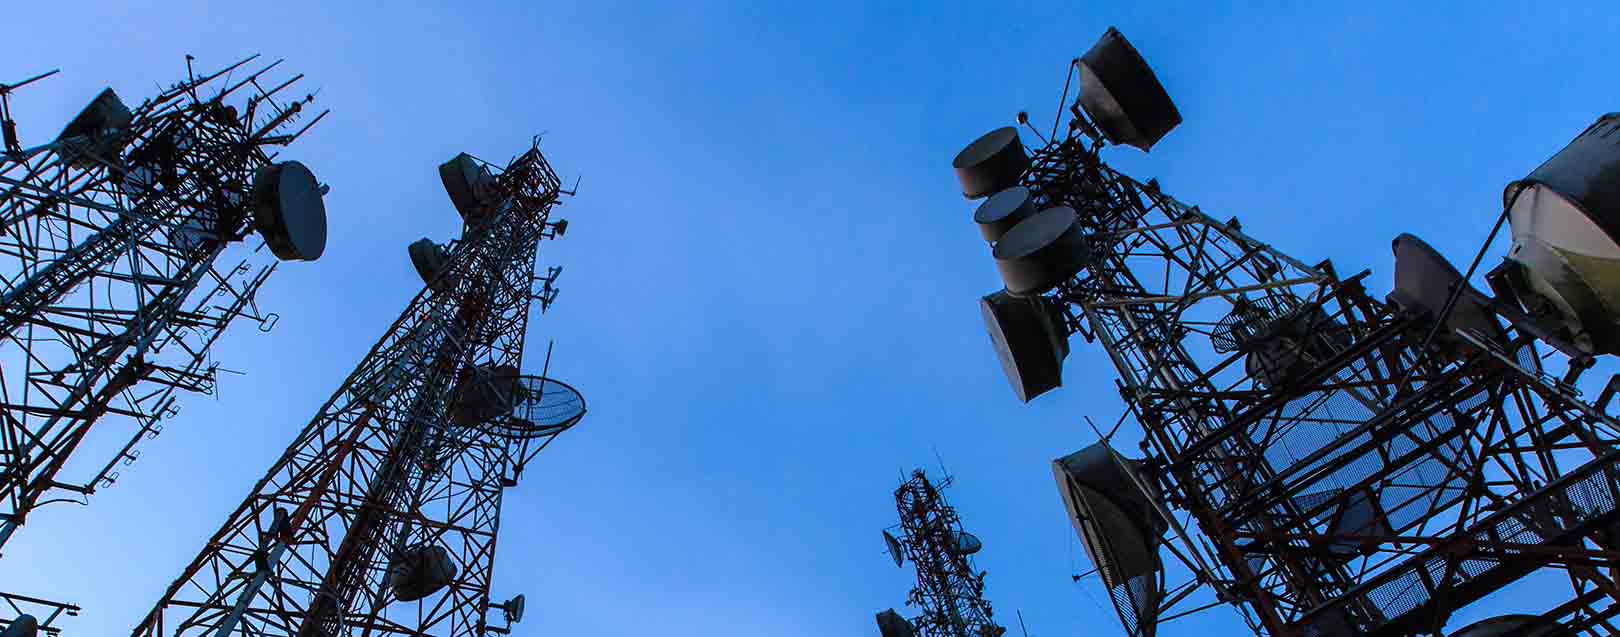 Indian telecom tower companies poised for 8-10% growth: Moody’s